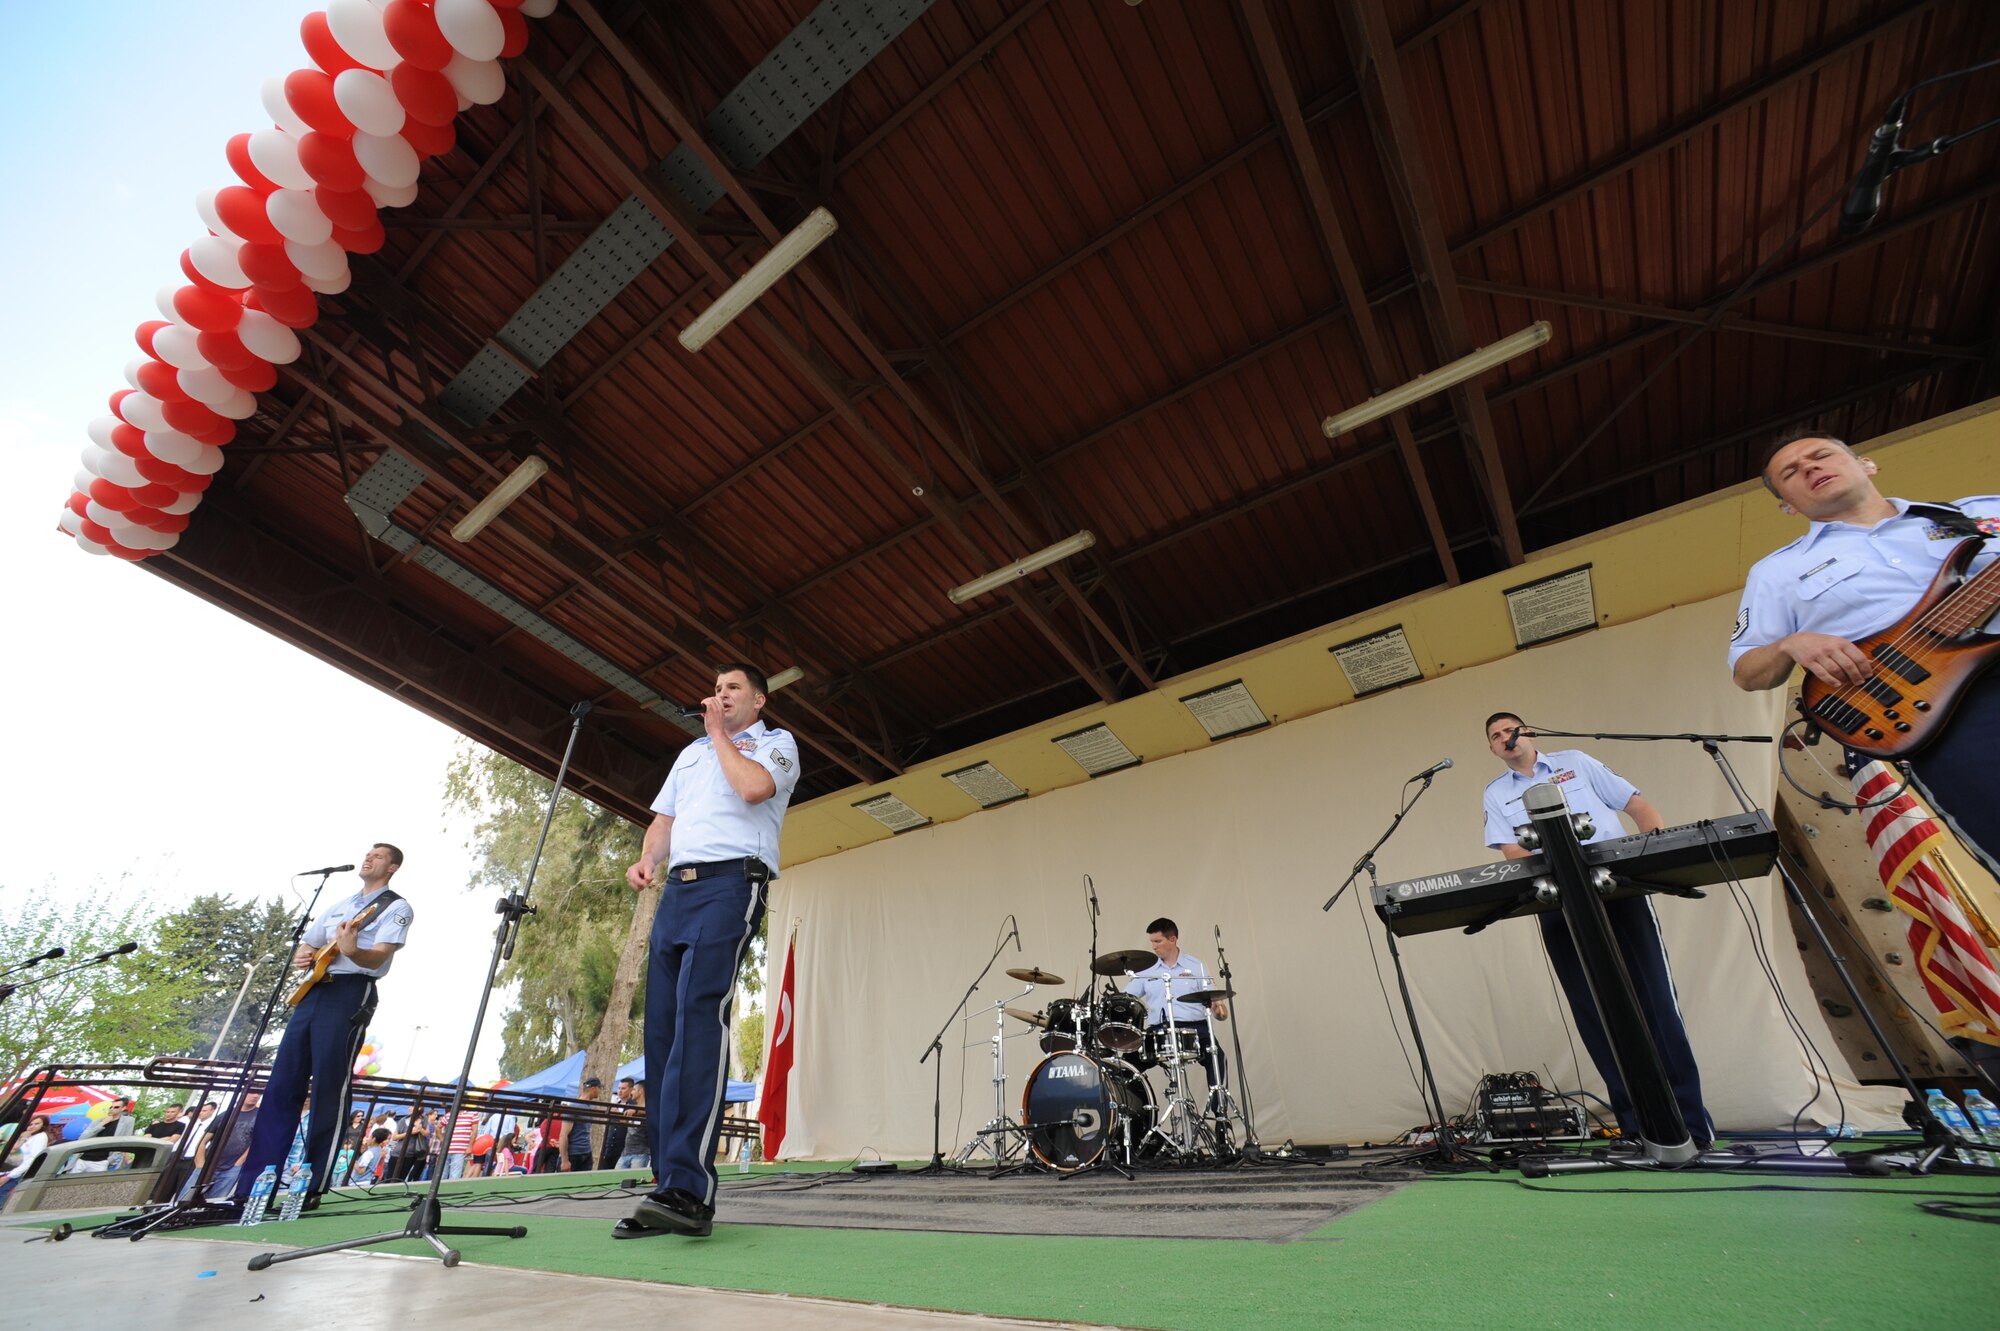 U.S. Air Forces in Europe rock band Touch 'n Go performs during a Children's Day festival April 22, 2012, at Incirlik Air Base, Turkey. The event was hosted by the Turkish air force 10th Tanker Base Command and was open to all Turkish and American members of Team Incirlik. The event offered an opportunity for camaraderie and building partnership between Turkish and American service members and civilians. Children's Day is a national holiday that honors Turkish children and the future of the country. (U.S. Air Force photo by Senior Airman Jarvie Z. Wallace/Released) 